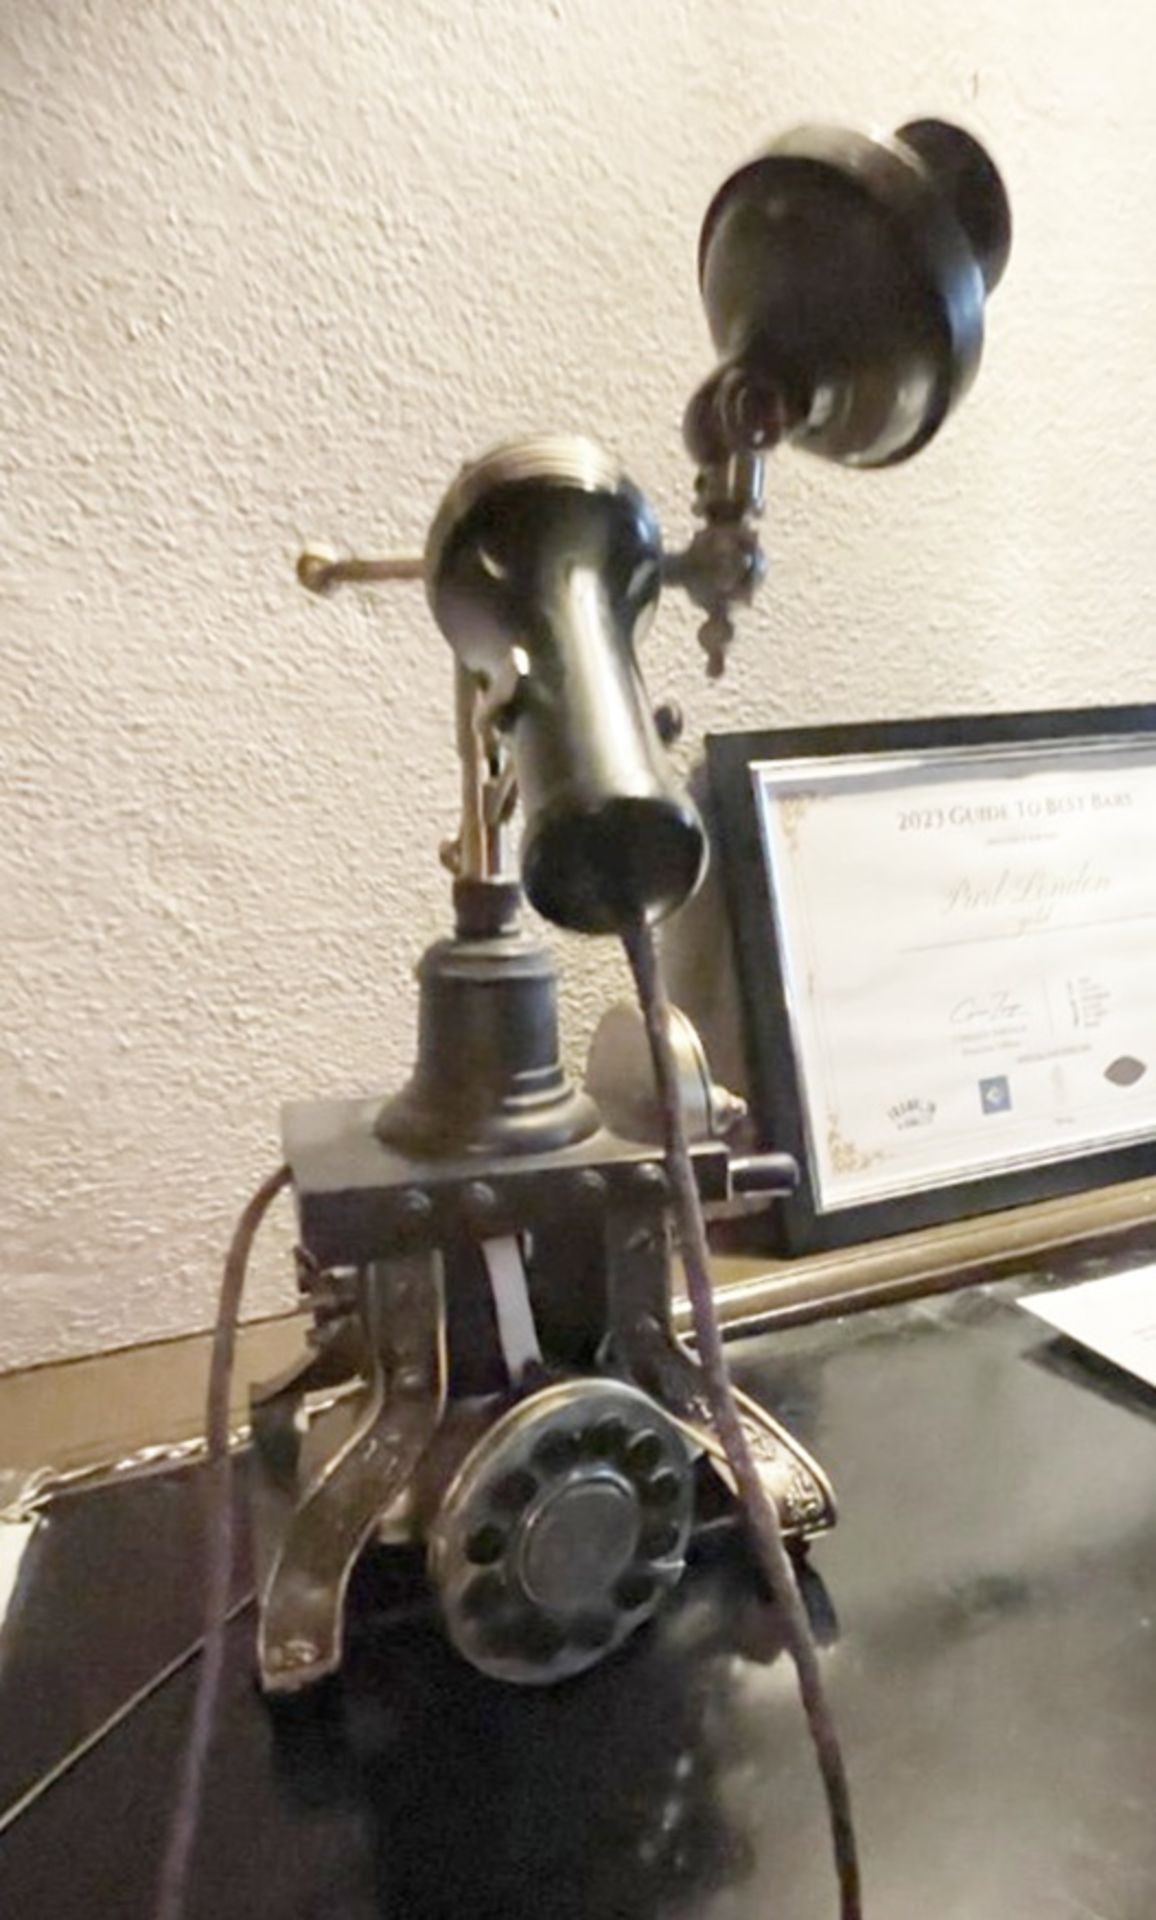 1 x Vintage Style Metal Candlestick Telephone with Line Cord - CL909 - Location: London, W1U This - Image 2 of 6